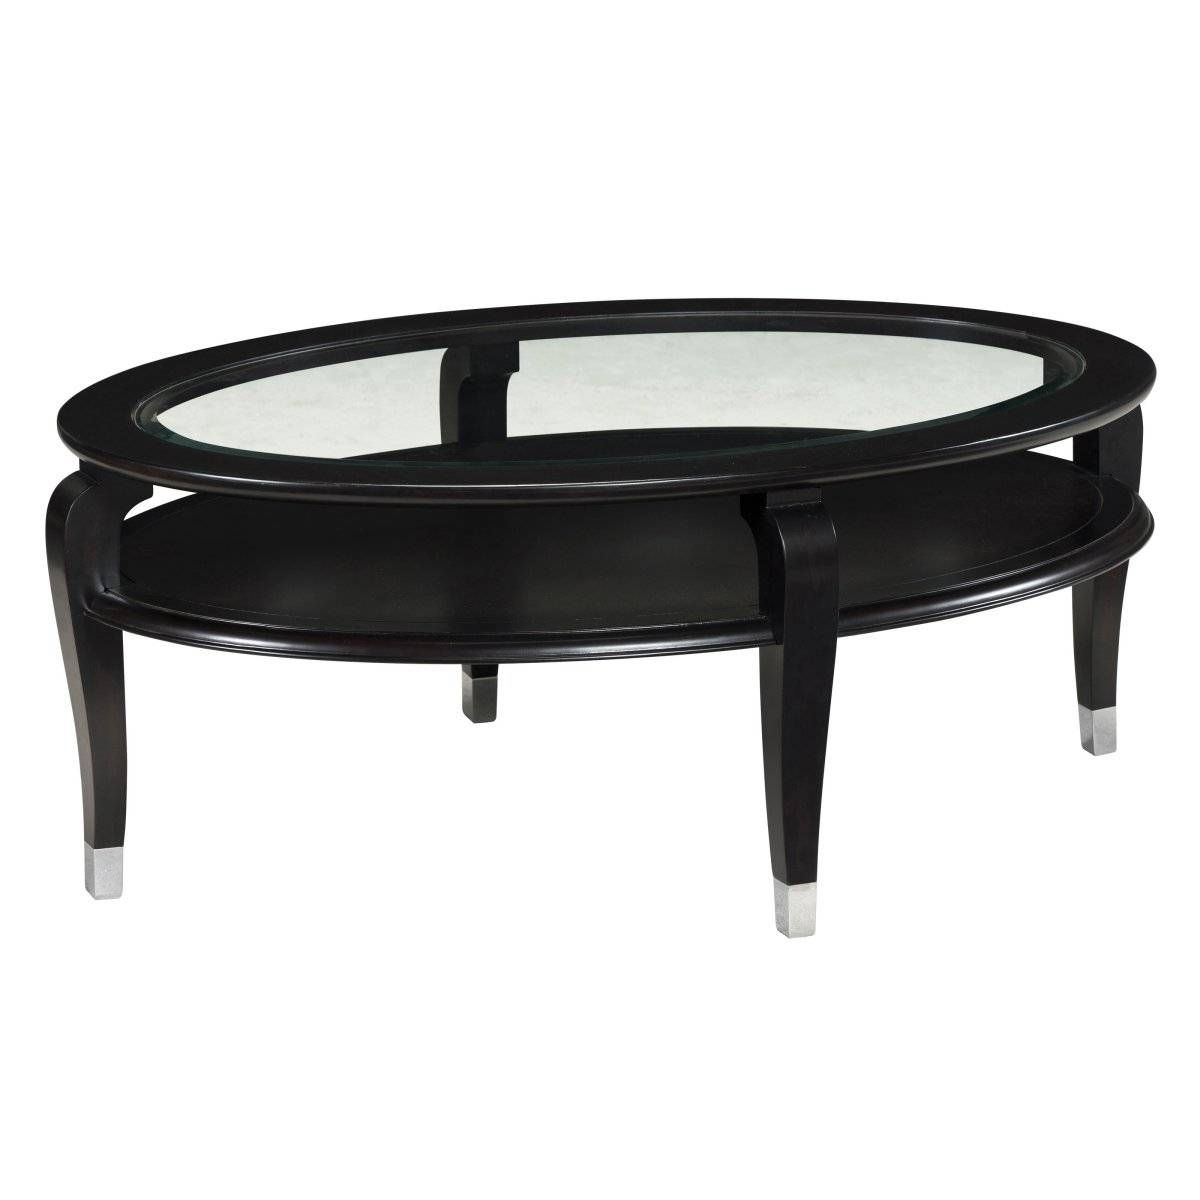 Brilliant Design Oval Glass Coffee Table – Oval Glass Coffee Table For Oval Shaped Glass Coffee Tables (View 7 of 30)